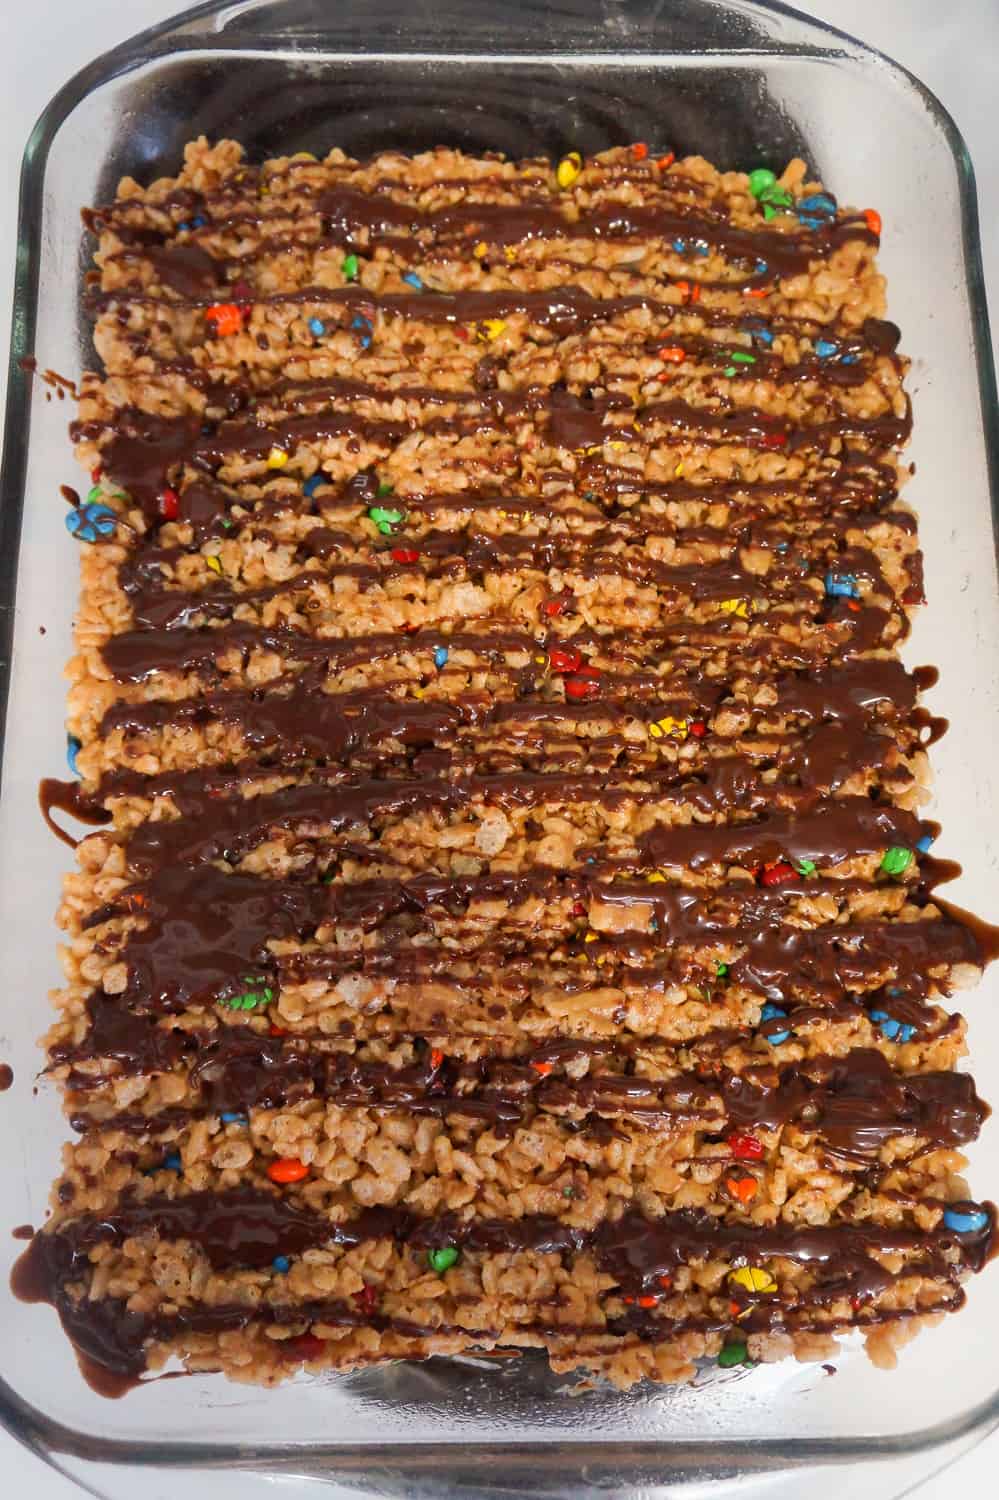 melted chocolate drizzled over peanut butter rice krispie treats